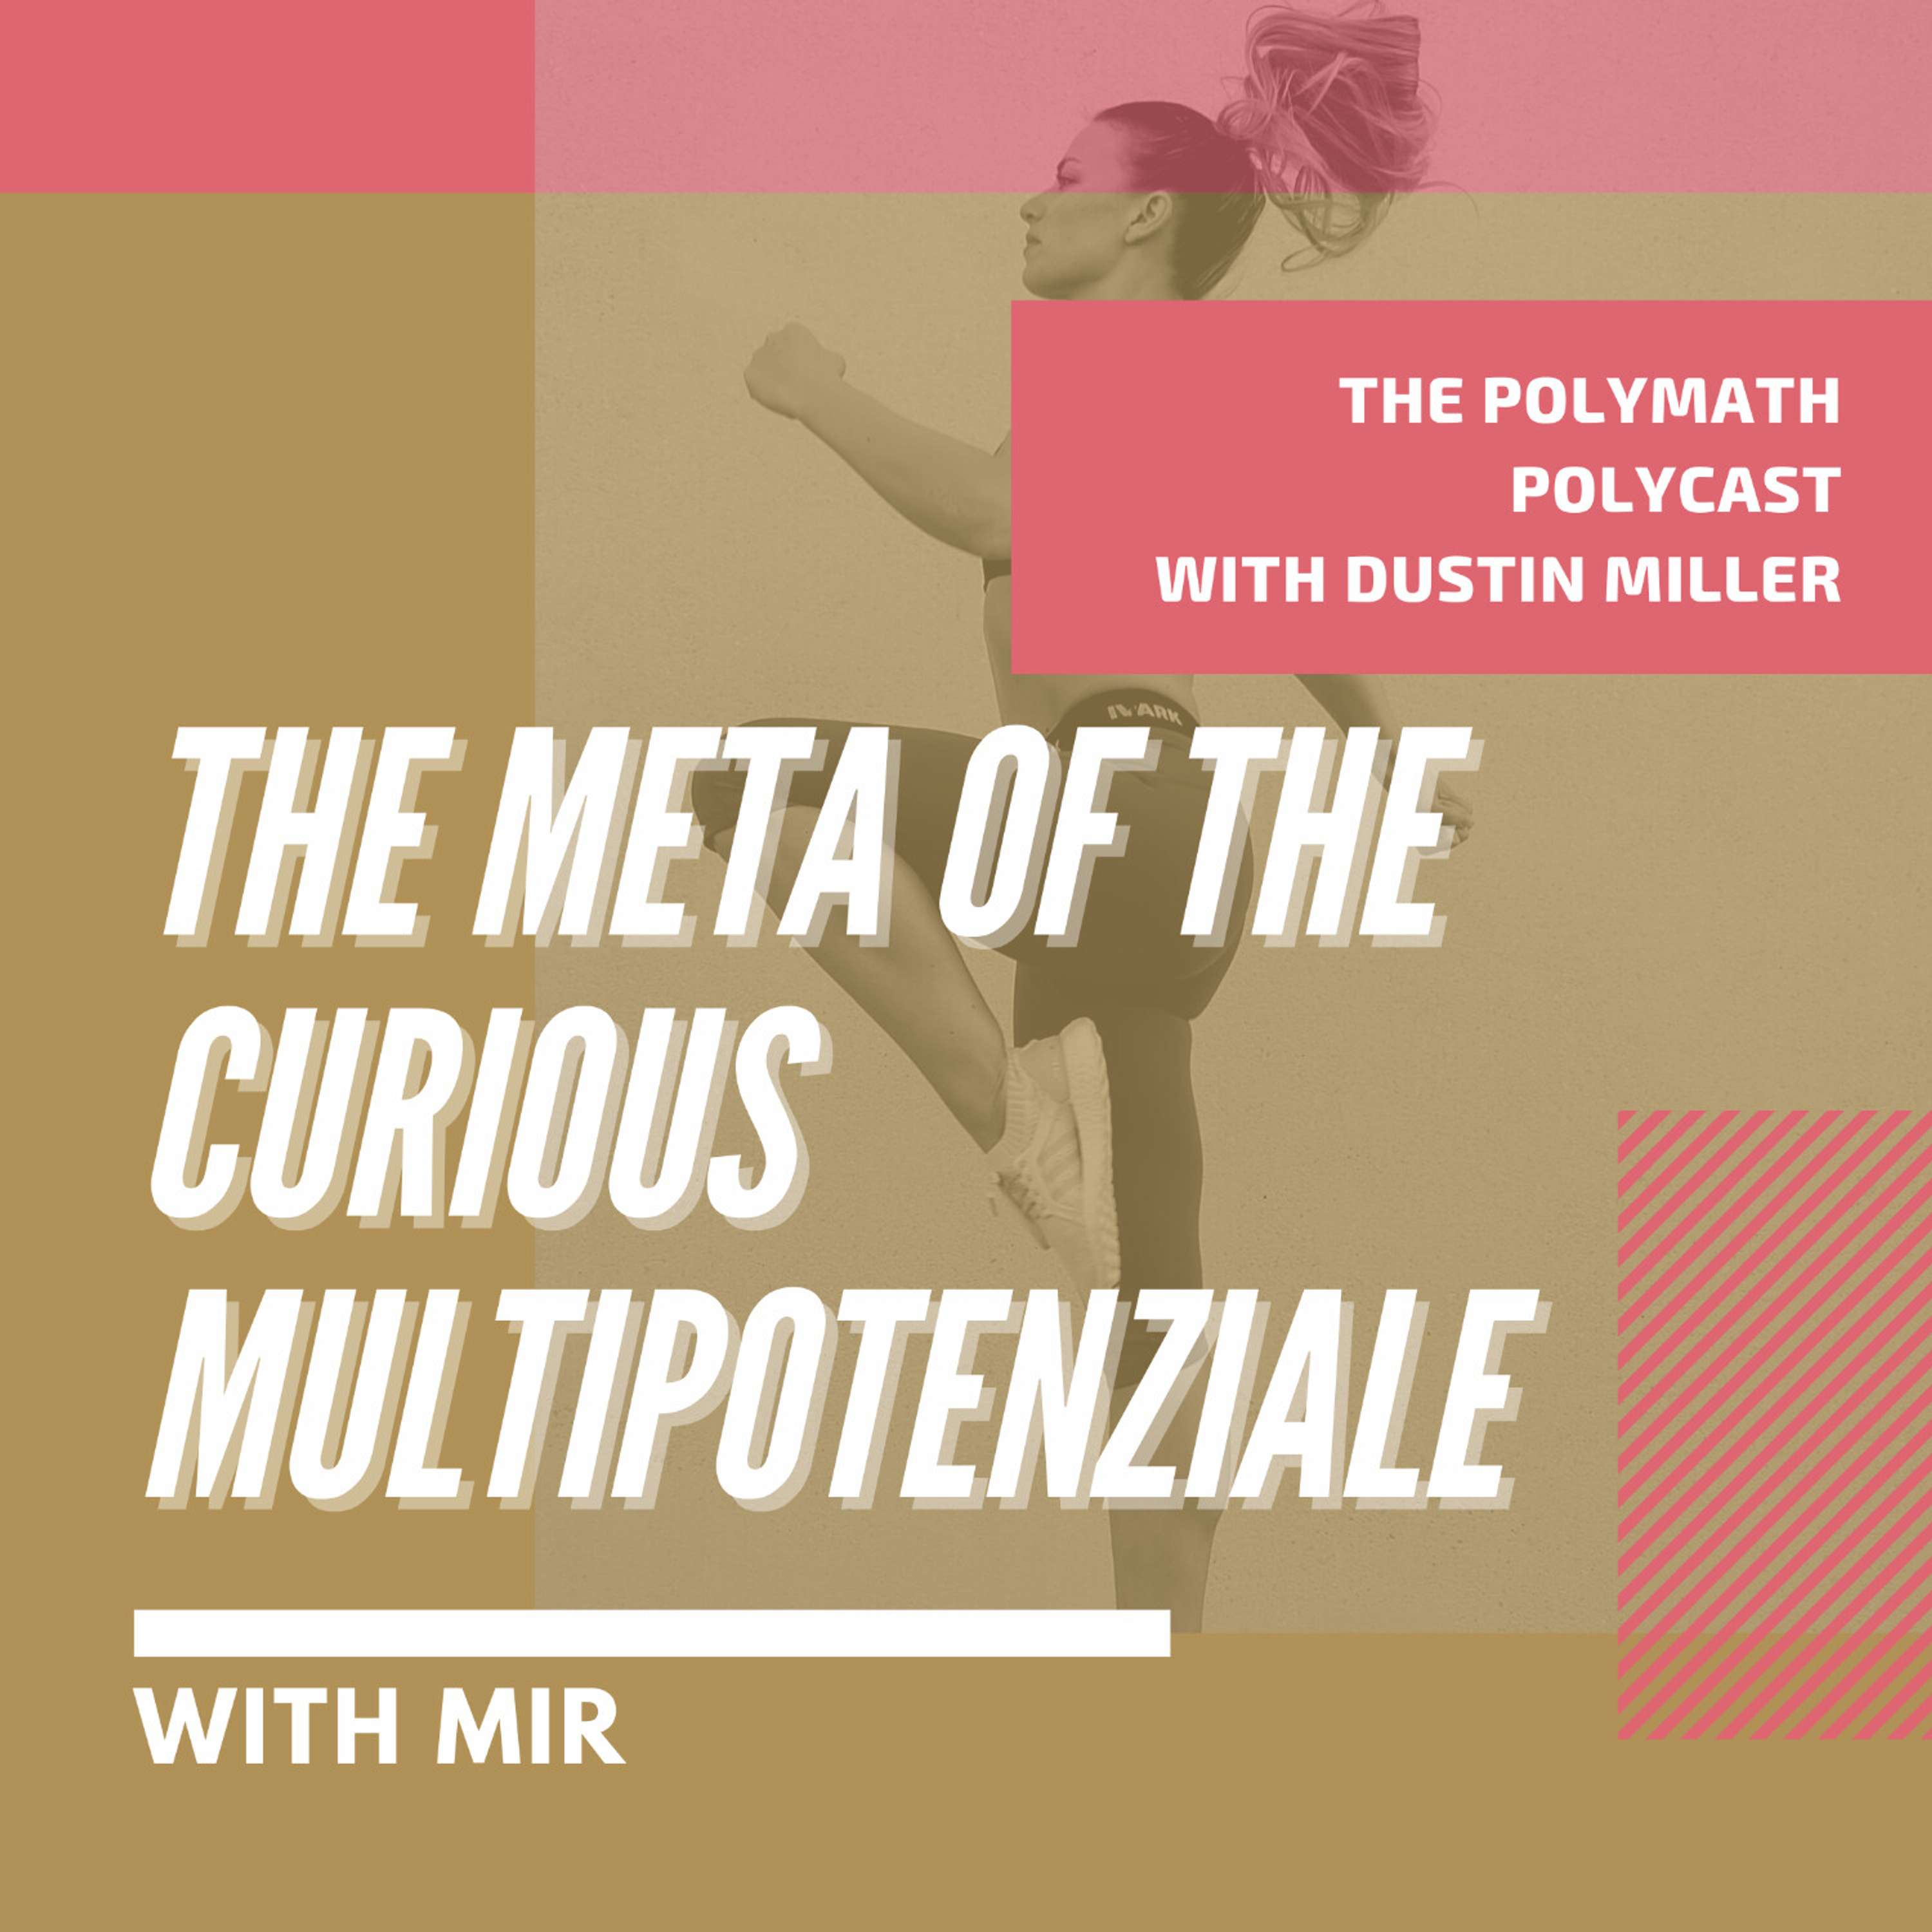 The Meta of the Curious Multipotenziale with MIR [Interview]